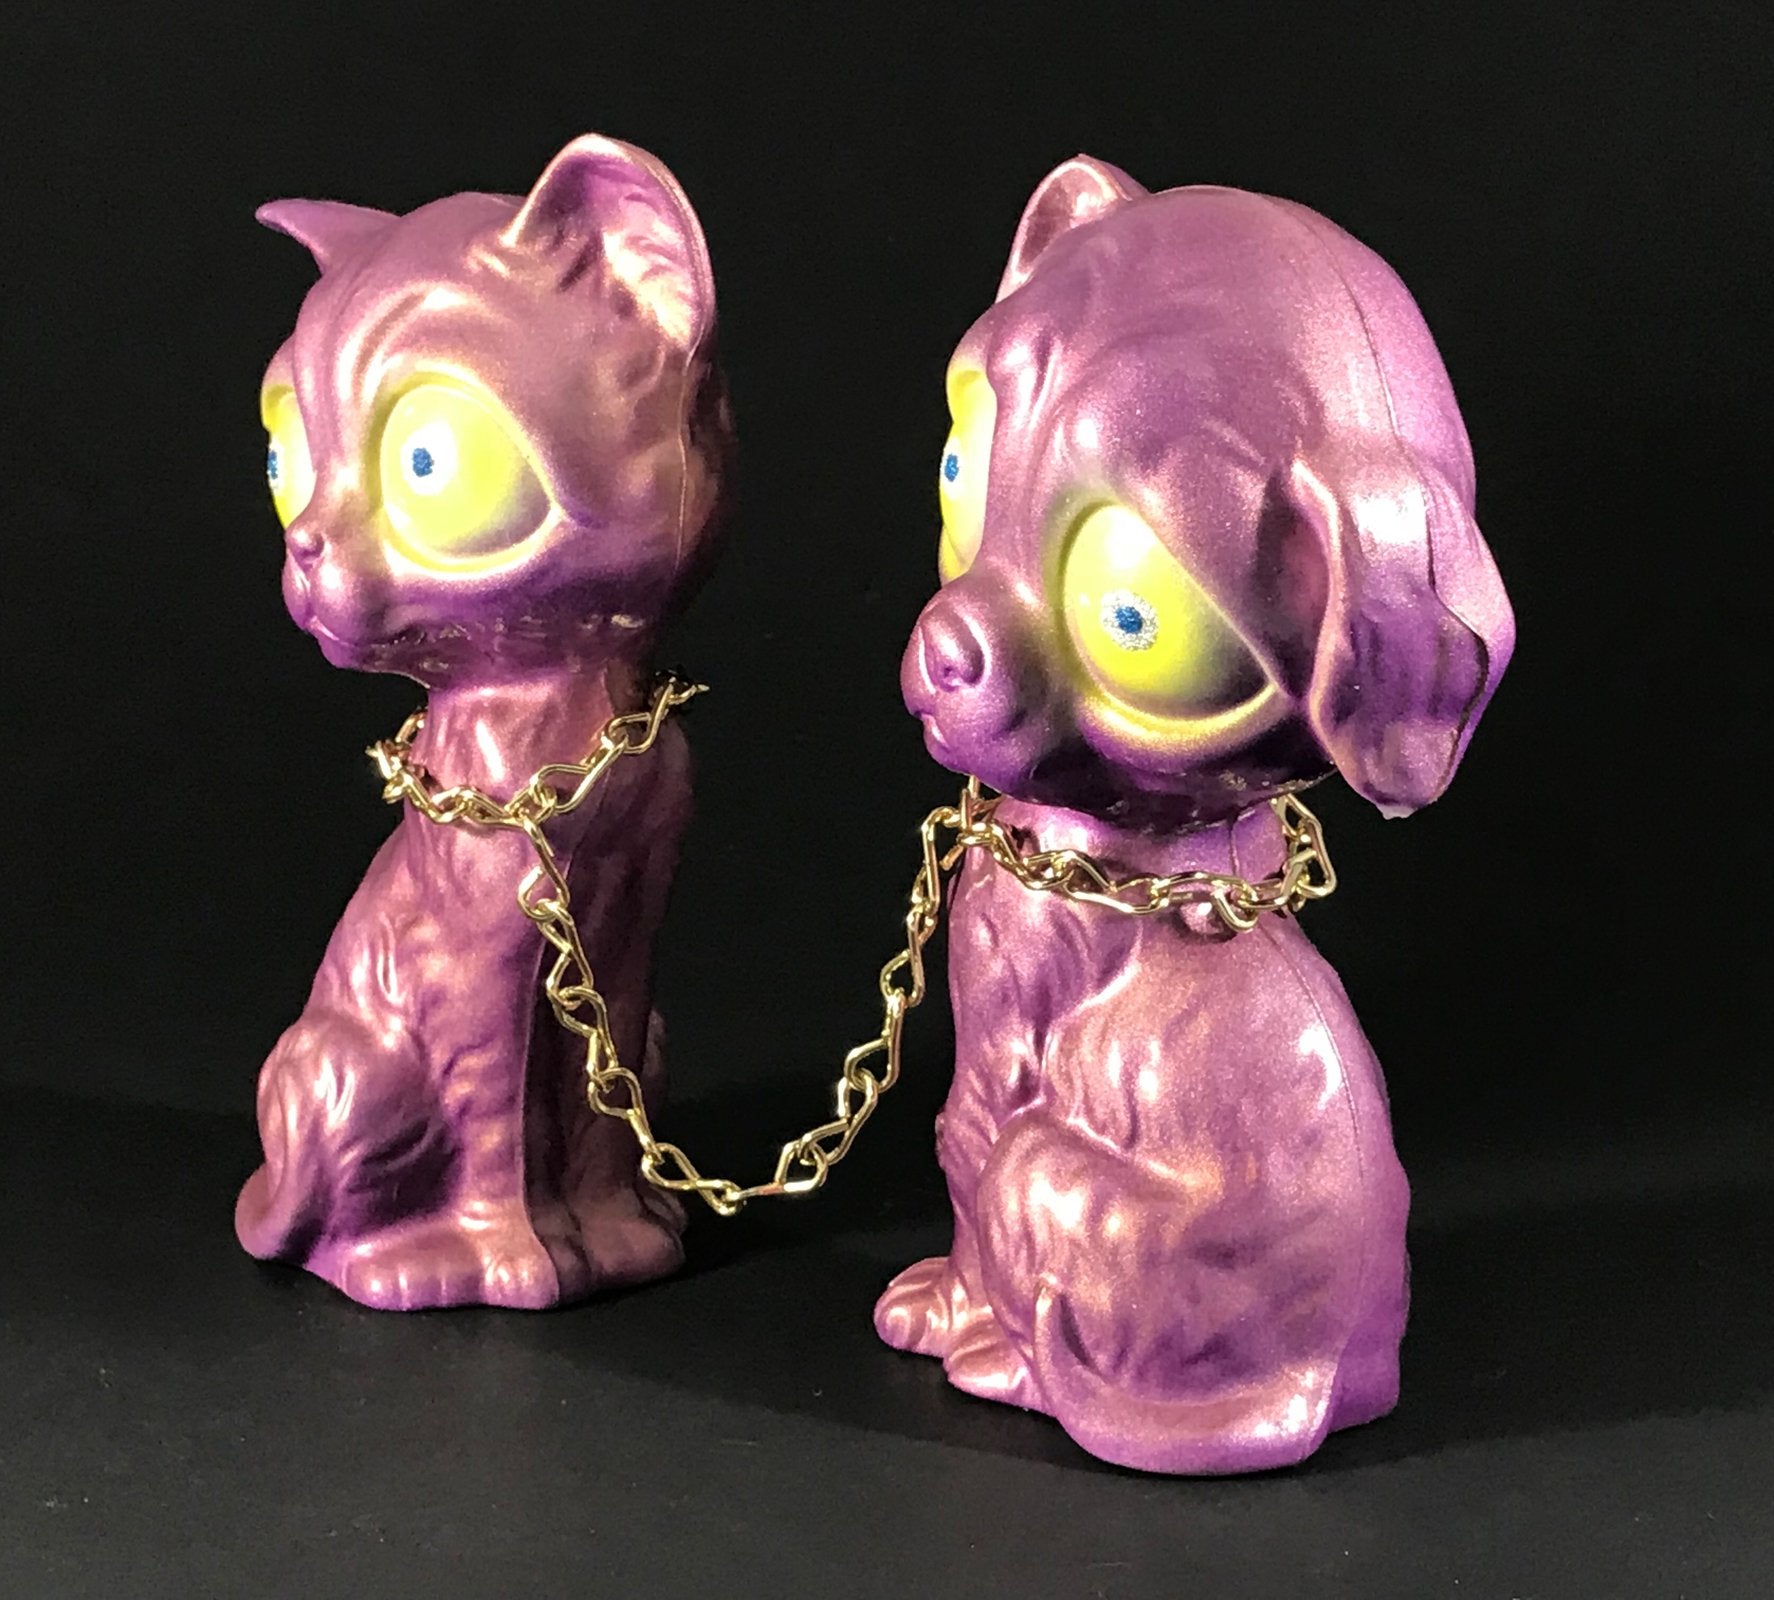 Chained sad dog and sad cat, iridescent purple/gold with metal flake/glitter eyes